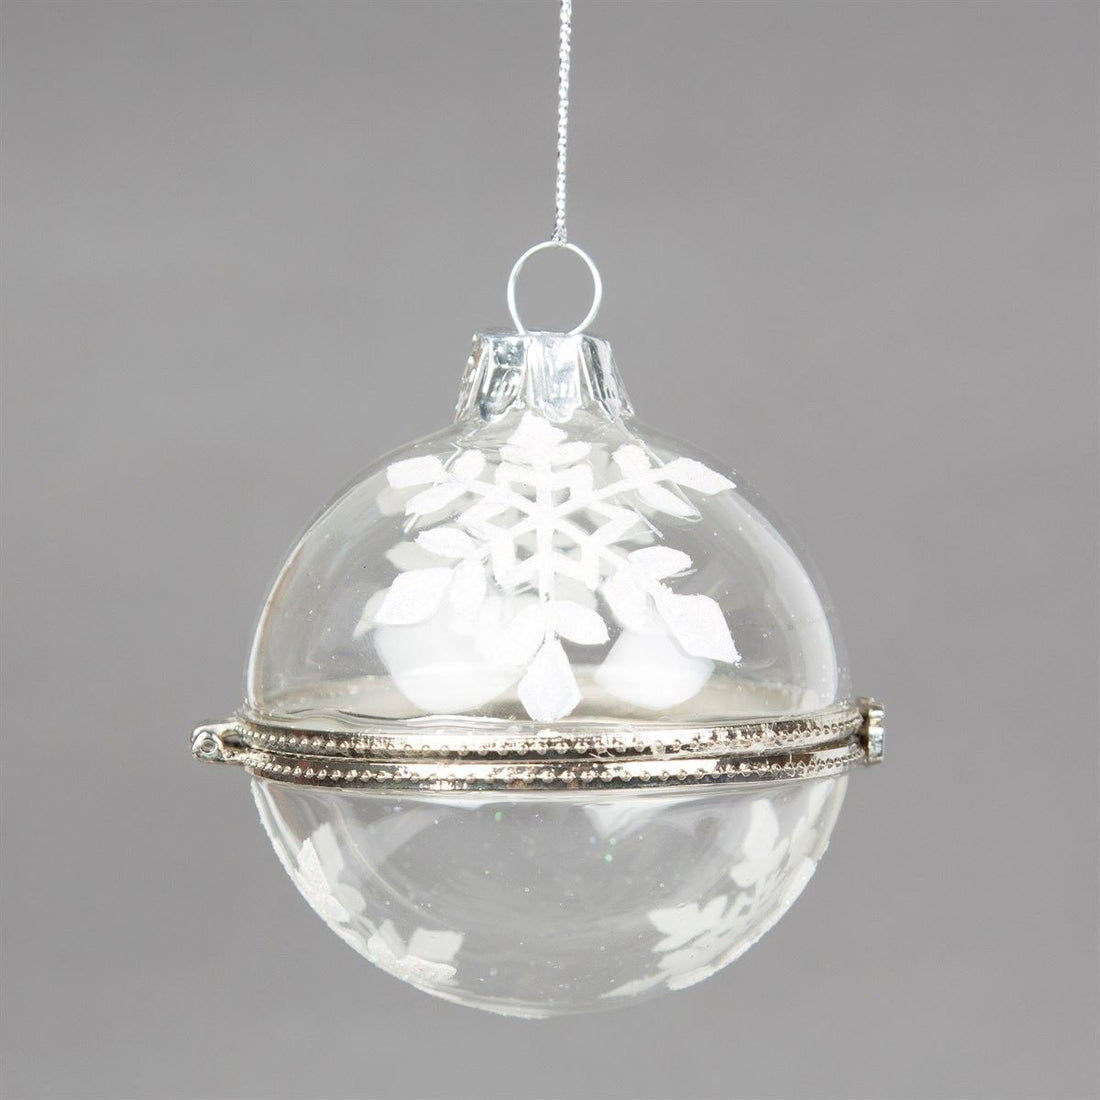 rjb-stone-imperial-snowflake-bauble-clear- (1)